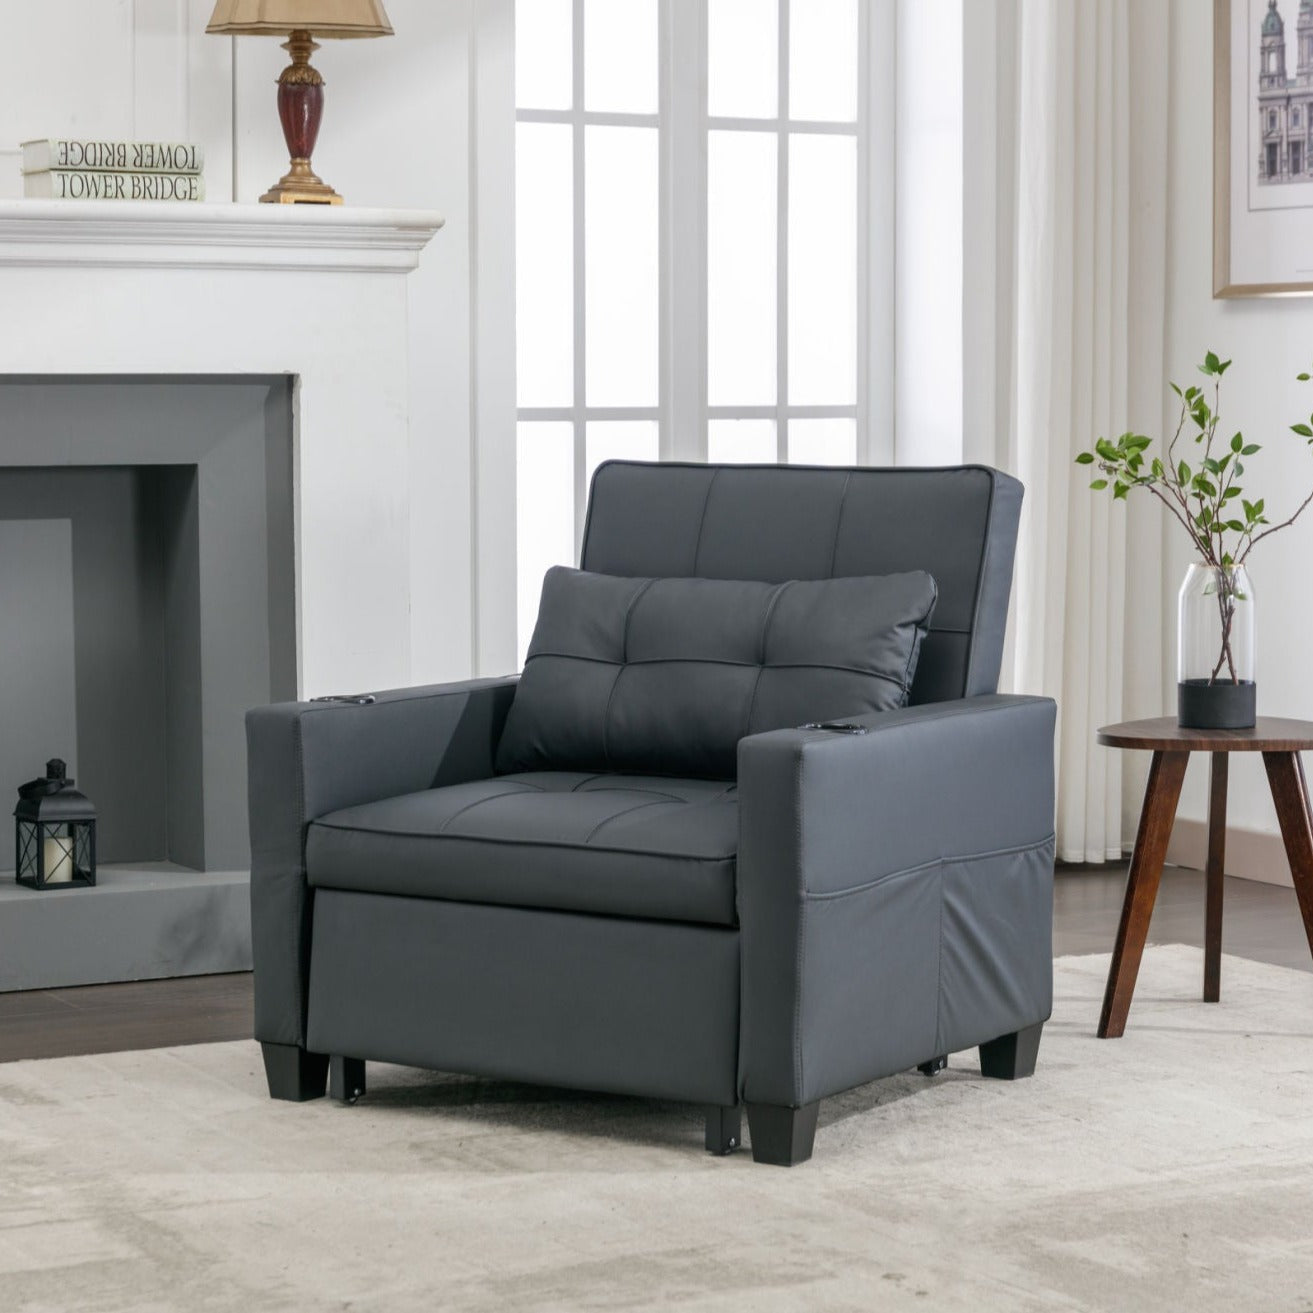 3-in-1 Pull Out Armchair